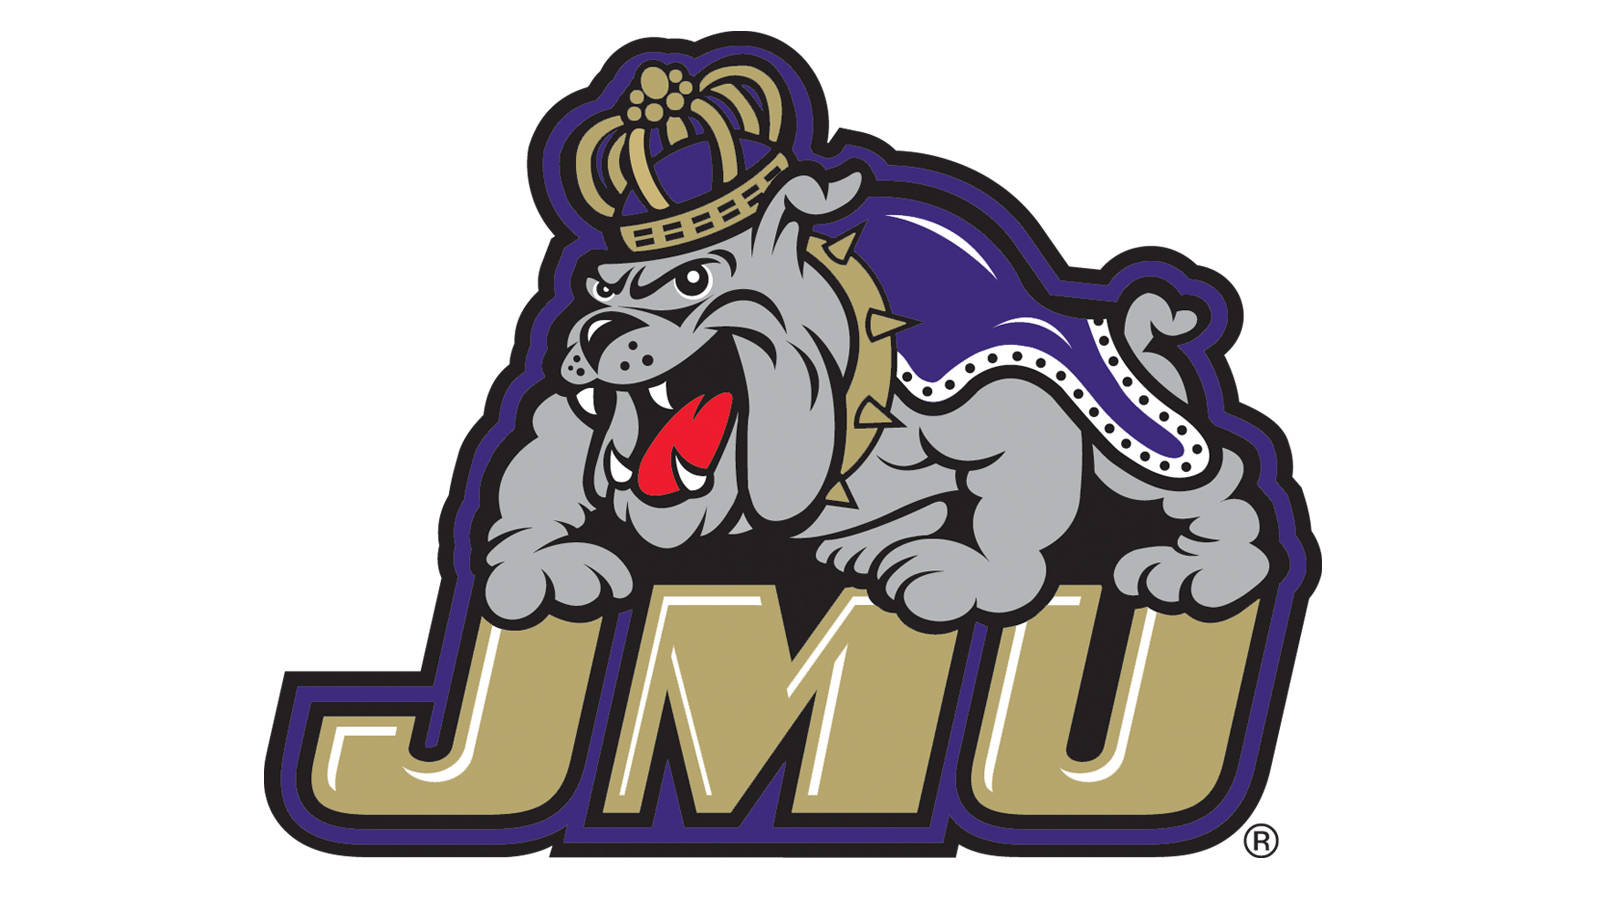 Jmu Dukes Mobile James Madison Apps For Android iPhone iPad